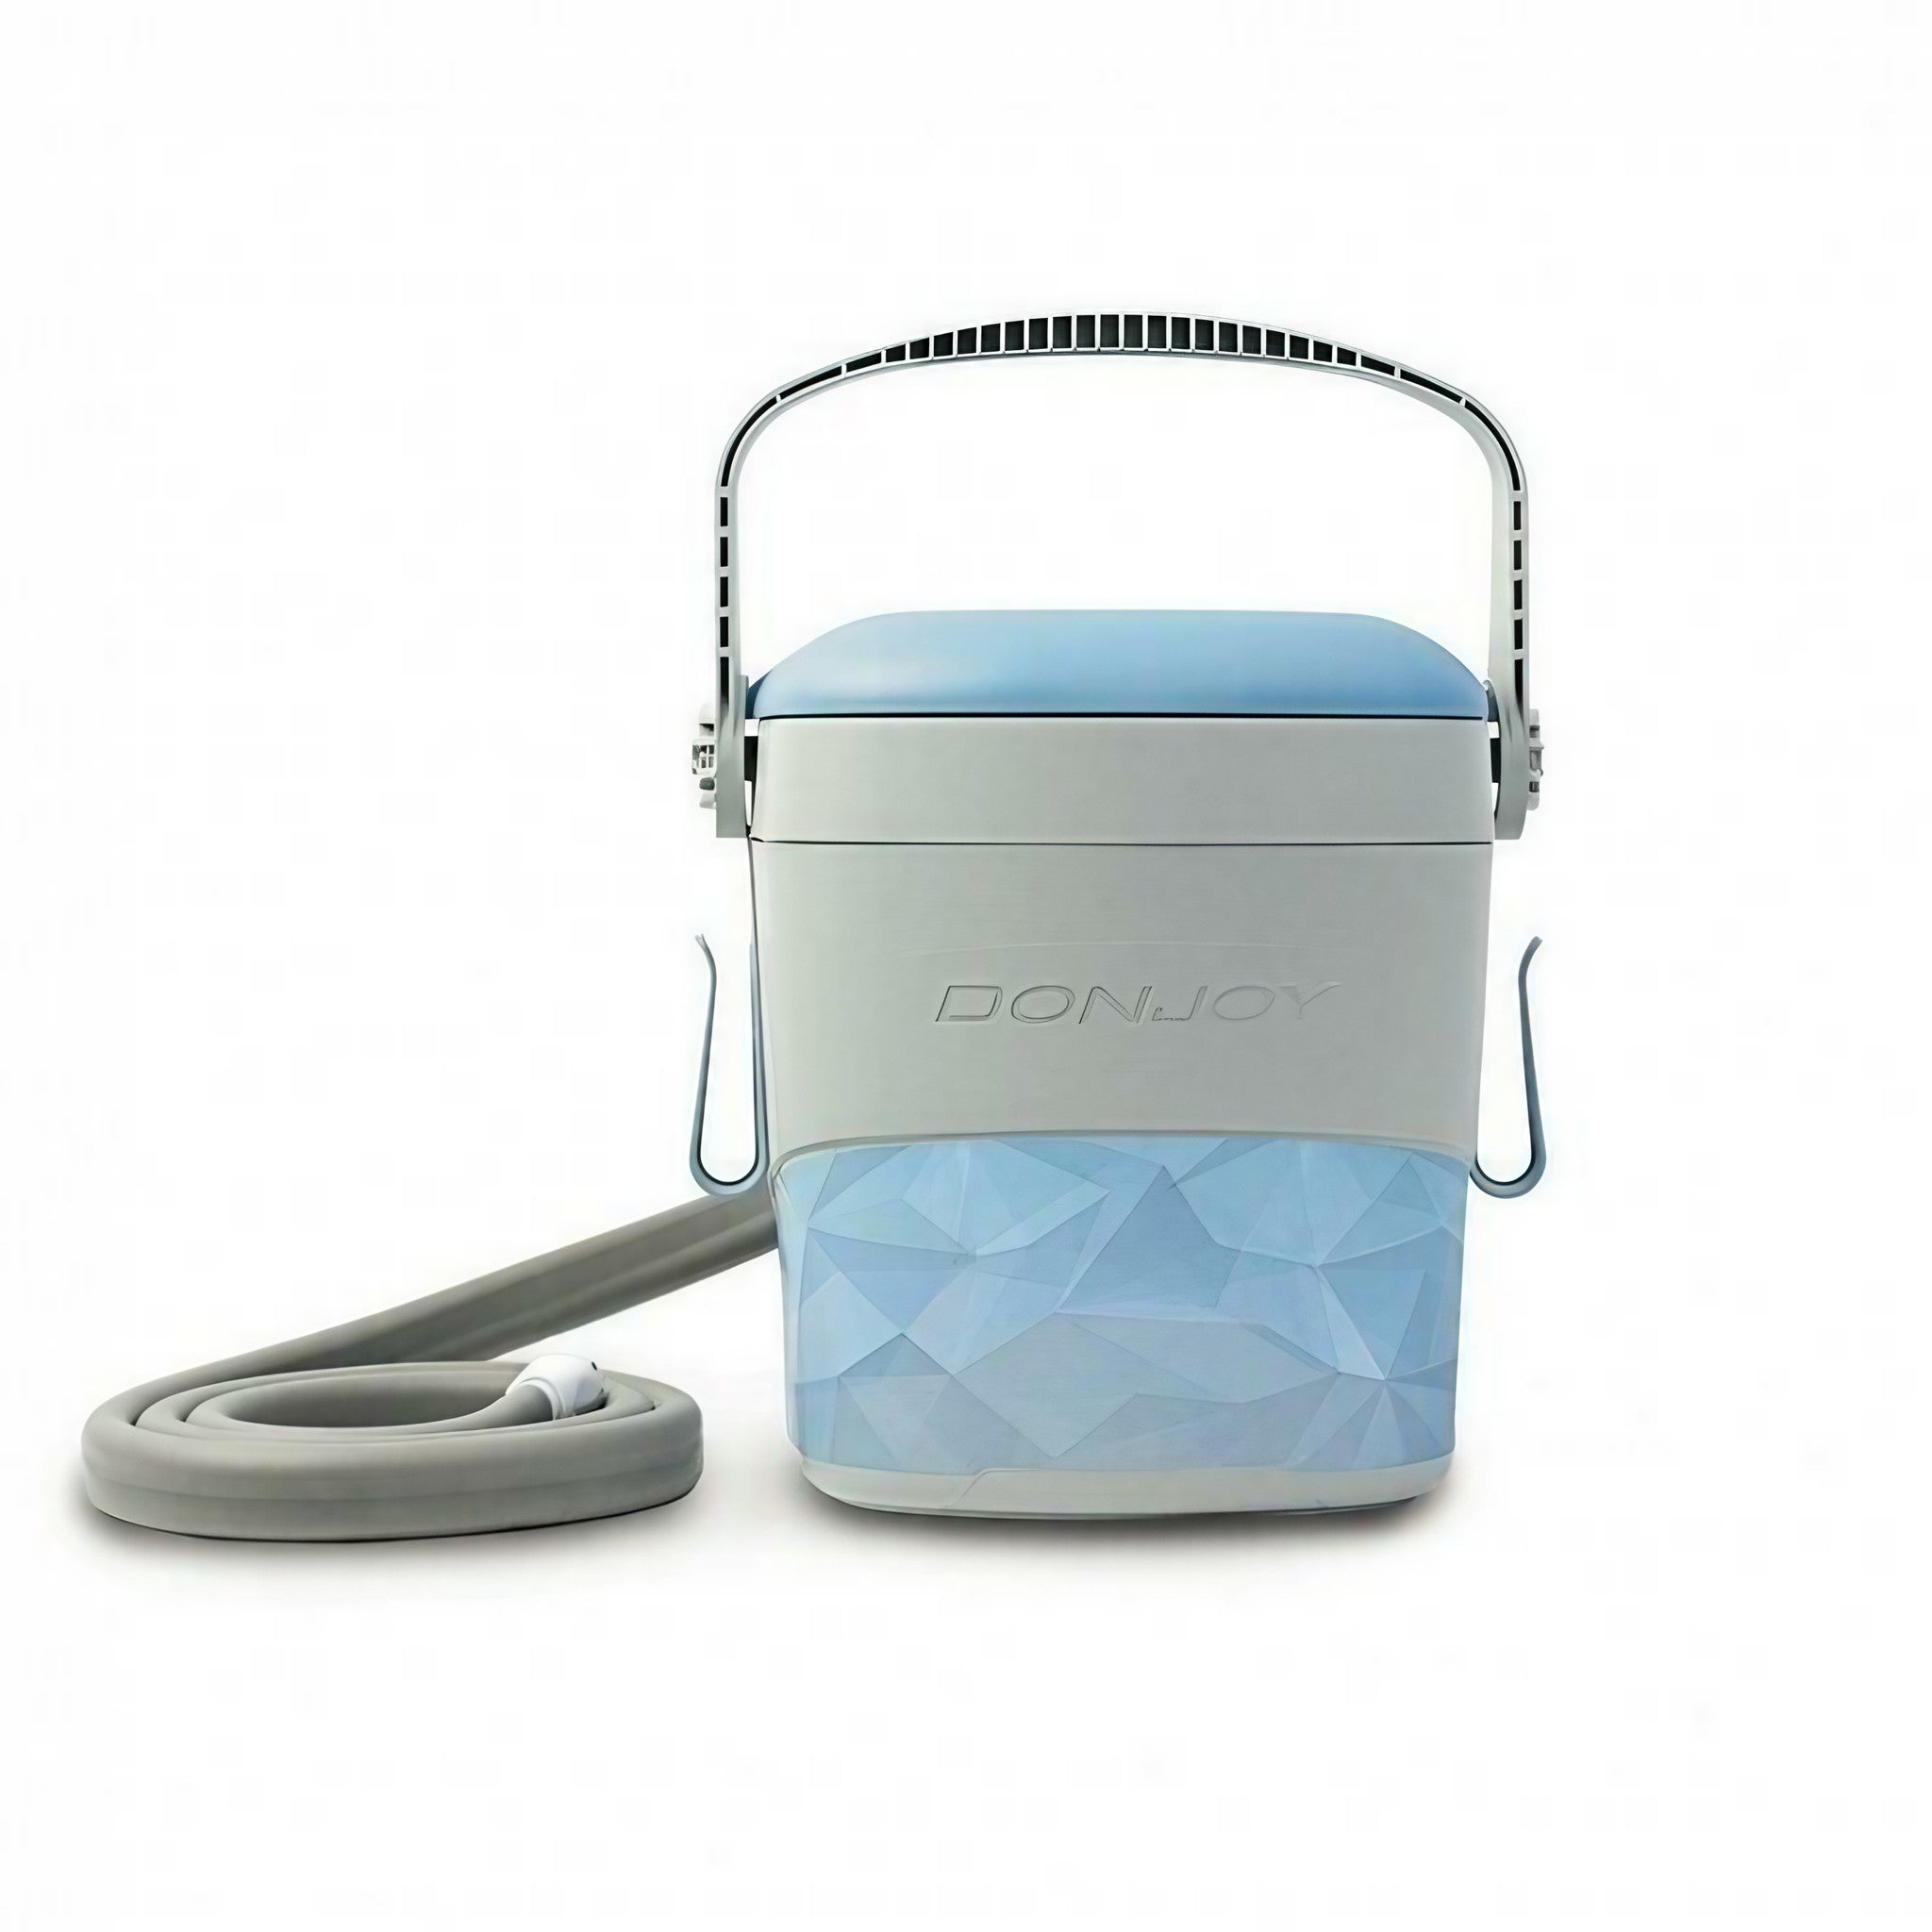 Donjoy Iceman Classic3 Cold Therapy Unit